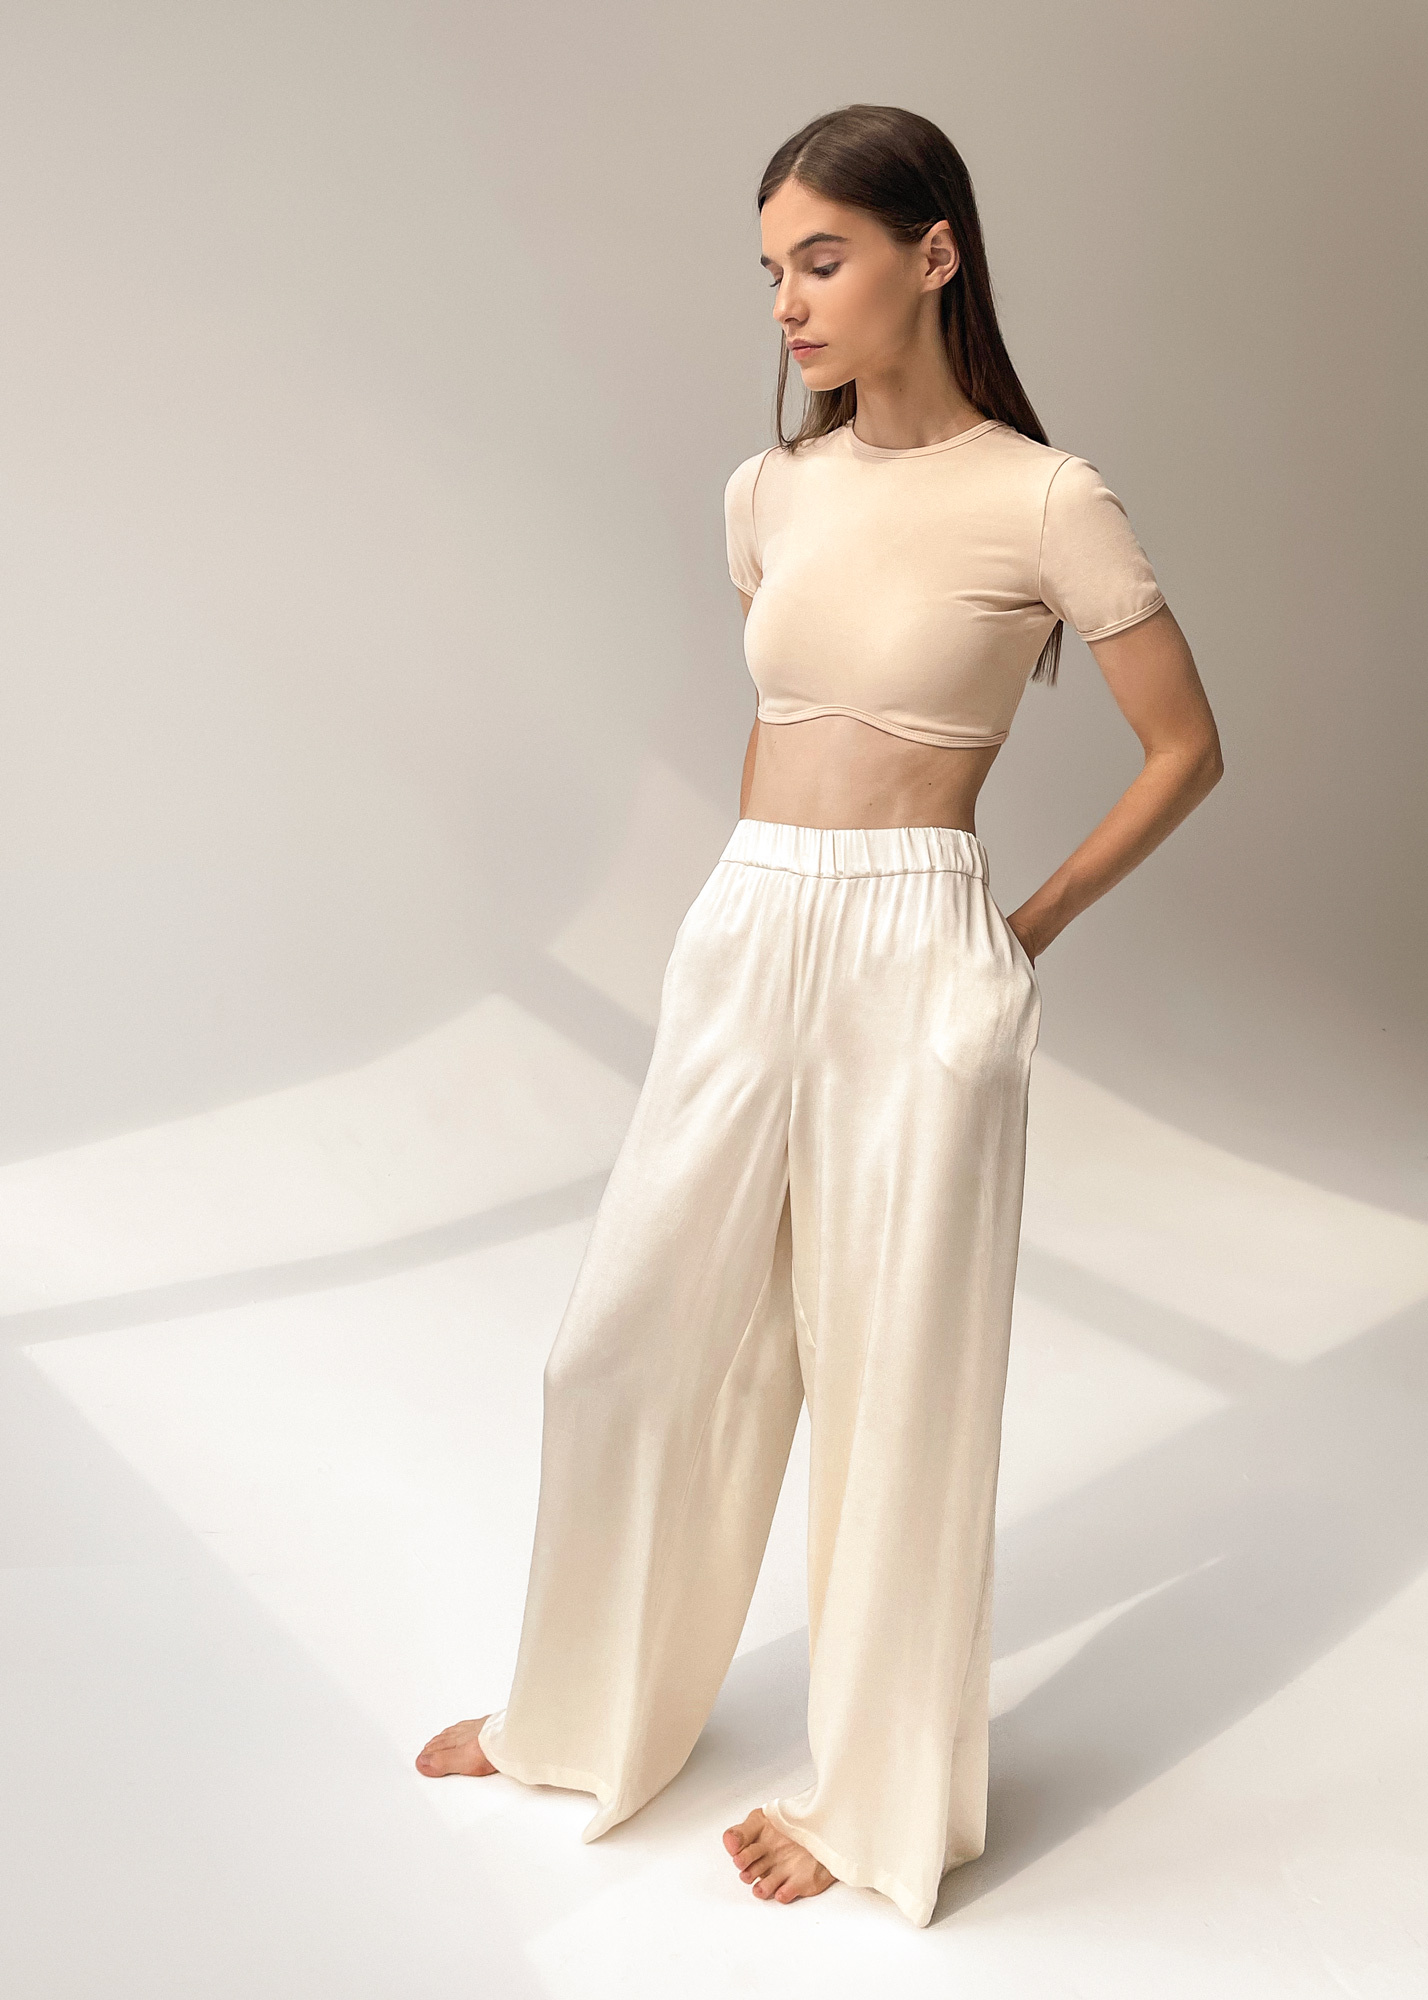 Womens Bottoms- Buy Trousers, Shorts and Palazzo Pants Online| Global Desi